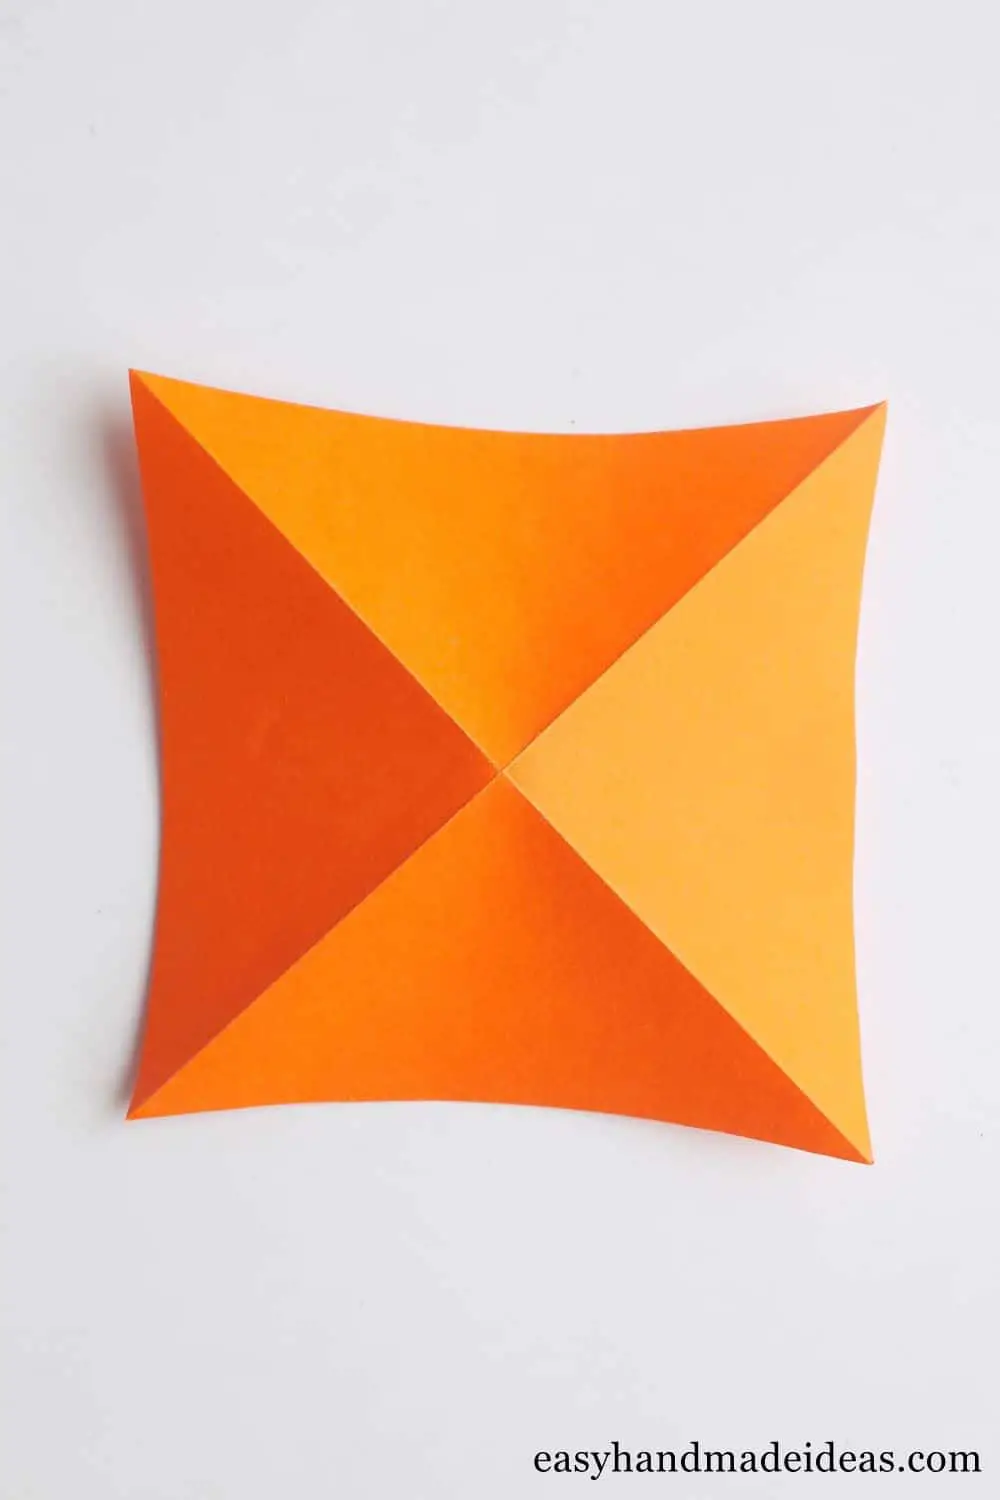 Square with diagonal folds